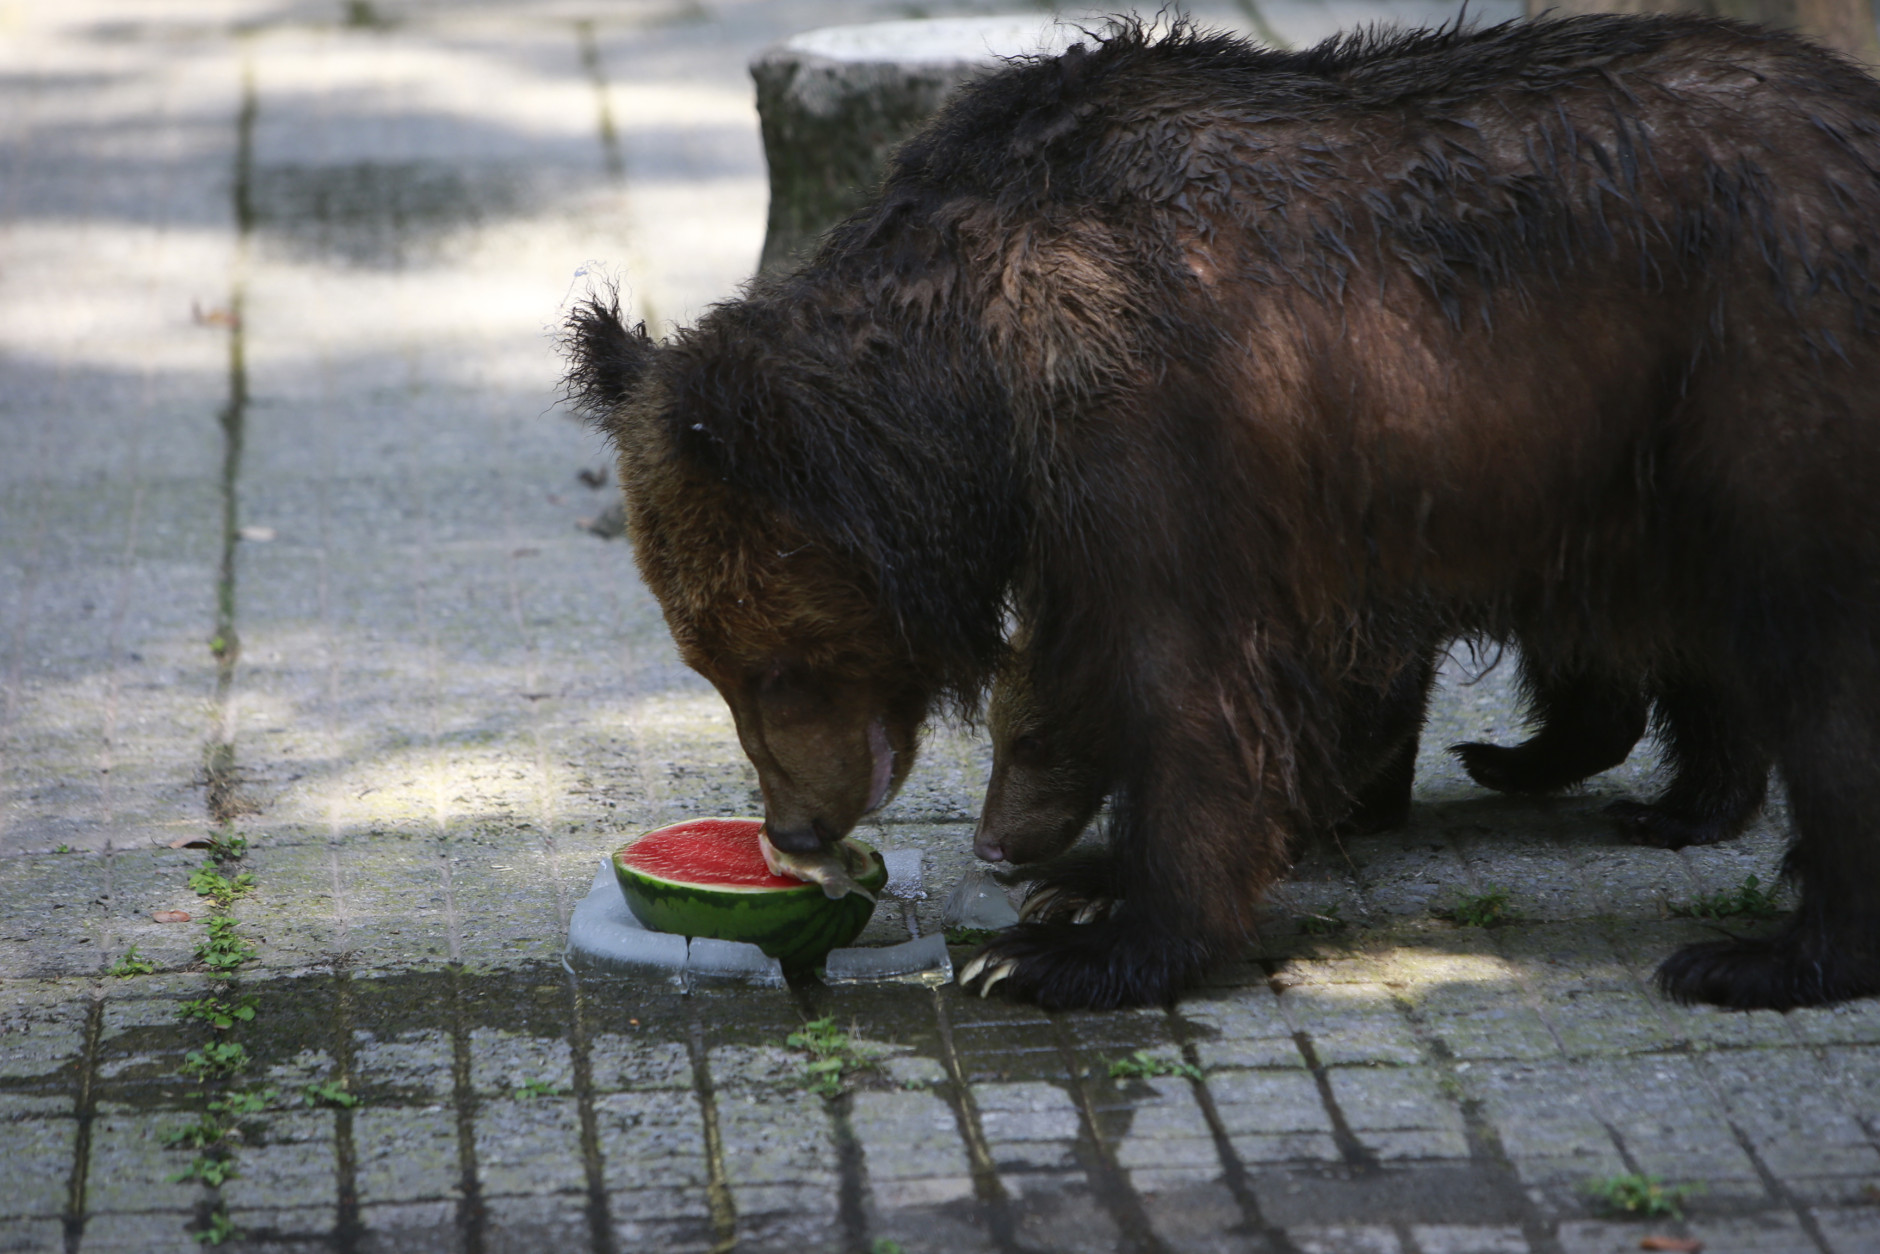 CHONGQING, CHINA - JULY 21: Bears eat cool watermelon at a zoo on July 21, 2016 in Chongqing, China. The high temperature reached to 40 degree celsius on Thursday.  (Photo by VCG/Getty Images)